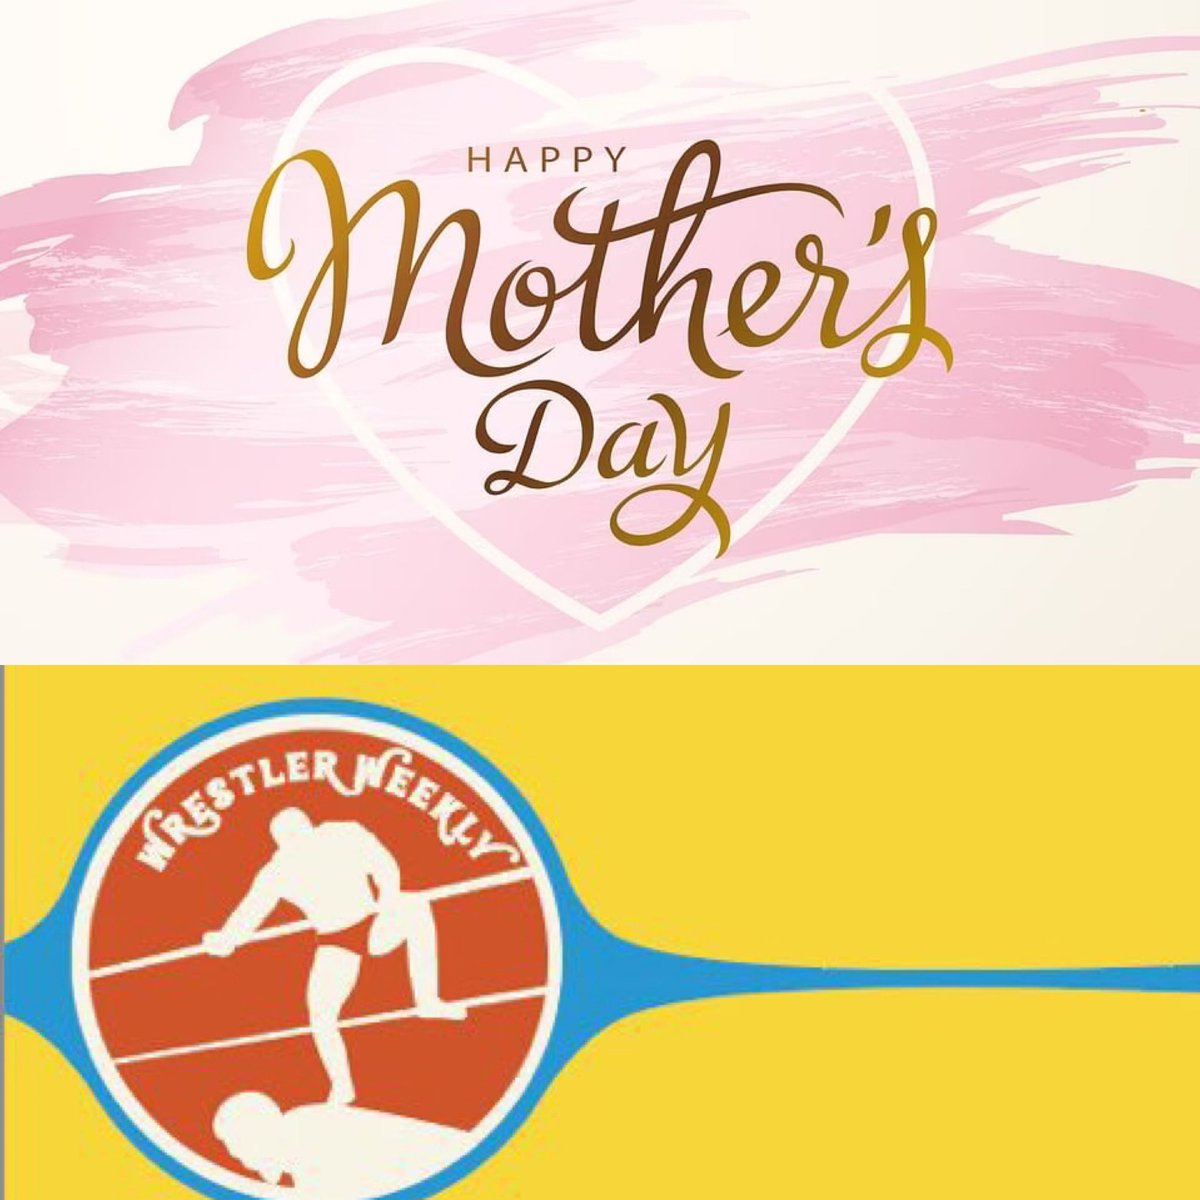 WRESTLER WEEKLY #wwSundayShoutout wishes a HAPPY MOTHERS DAY to all of our special moms who follow us on a daily basis! May your day be filled with much love and laughter! God bless you all! #HappyMothersDay